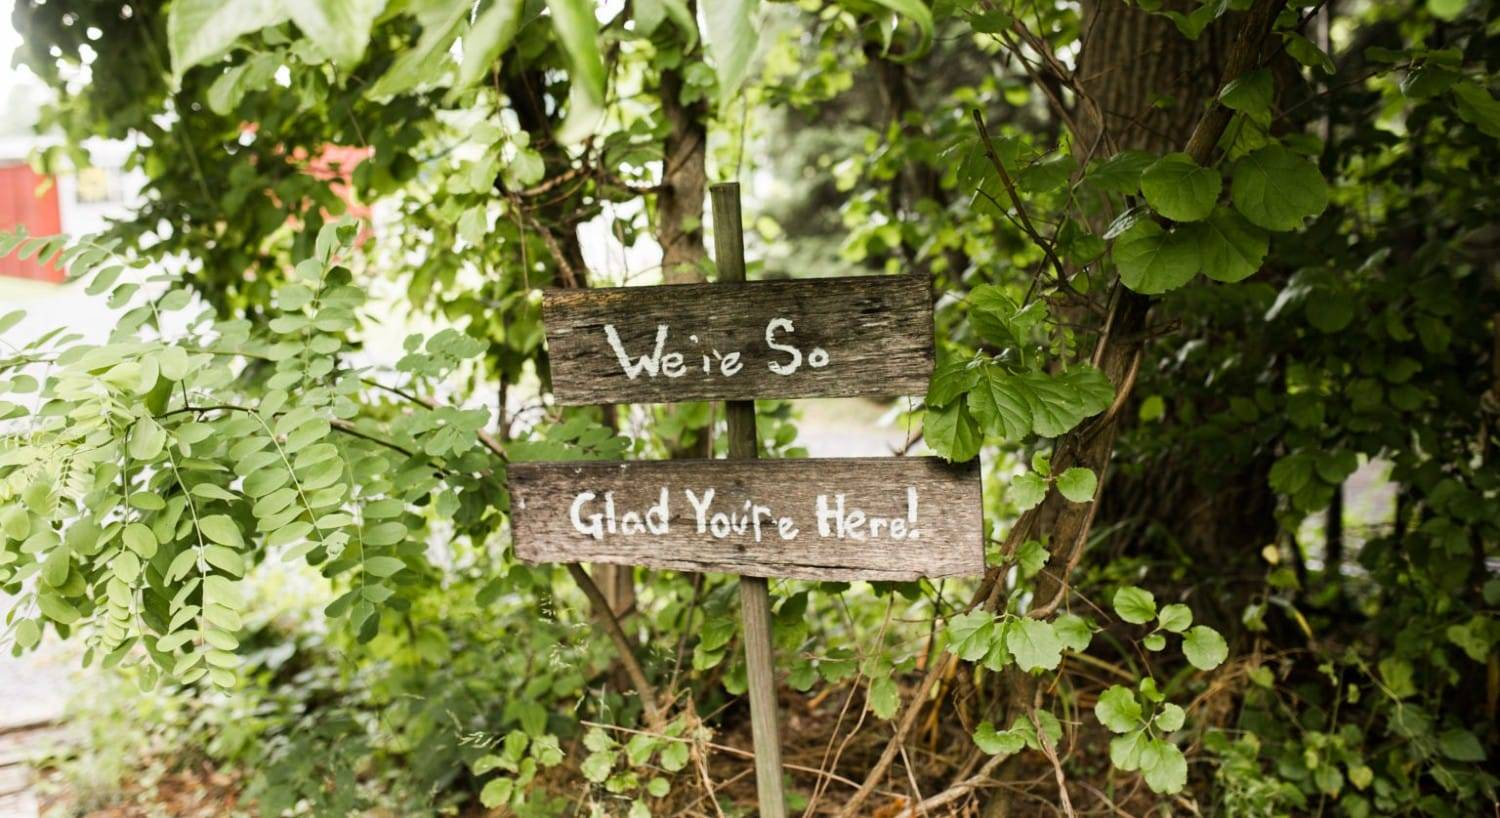 A rustic wooden sign in the woods with words "We're so glad you're here!"